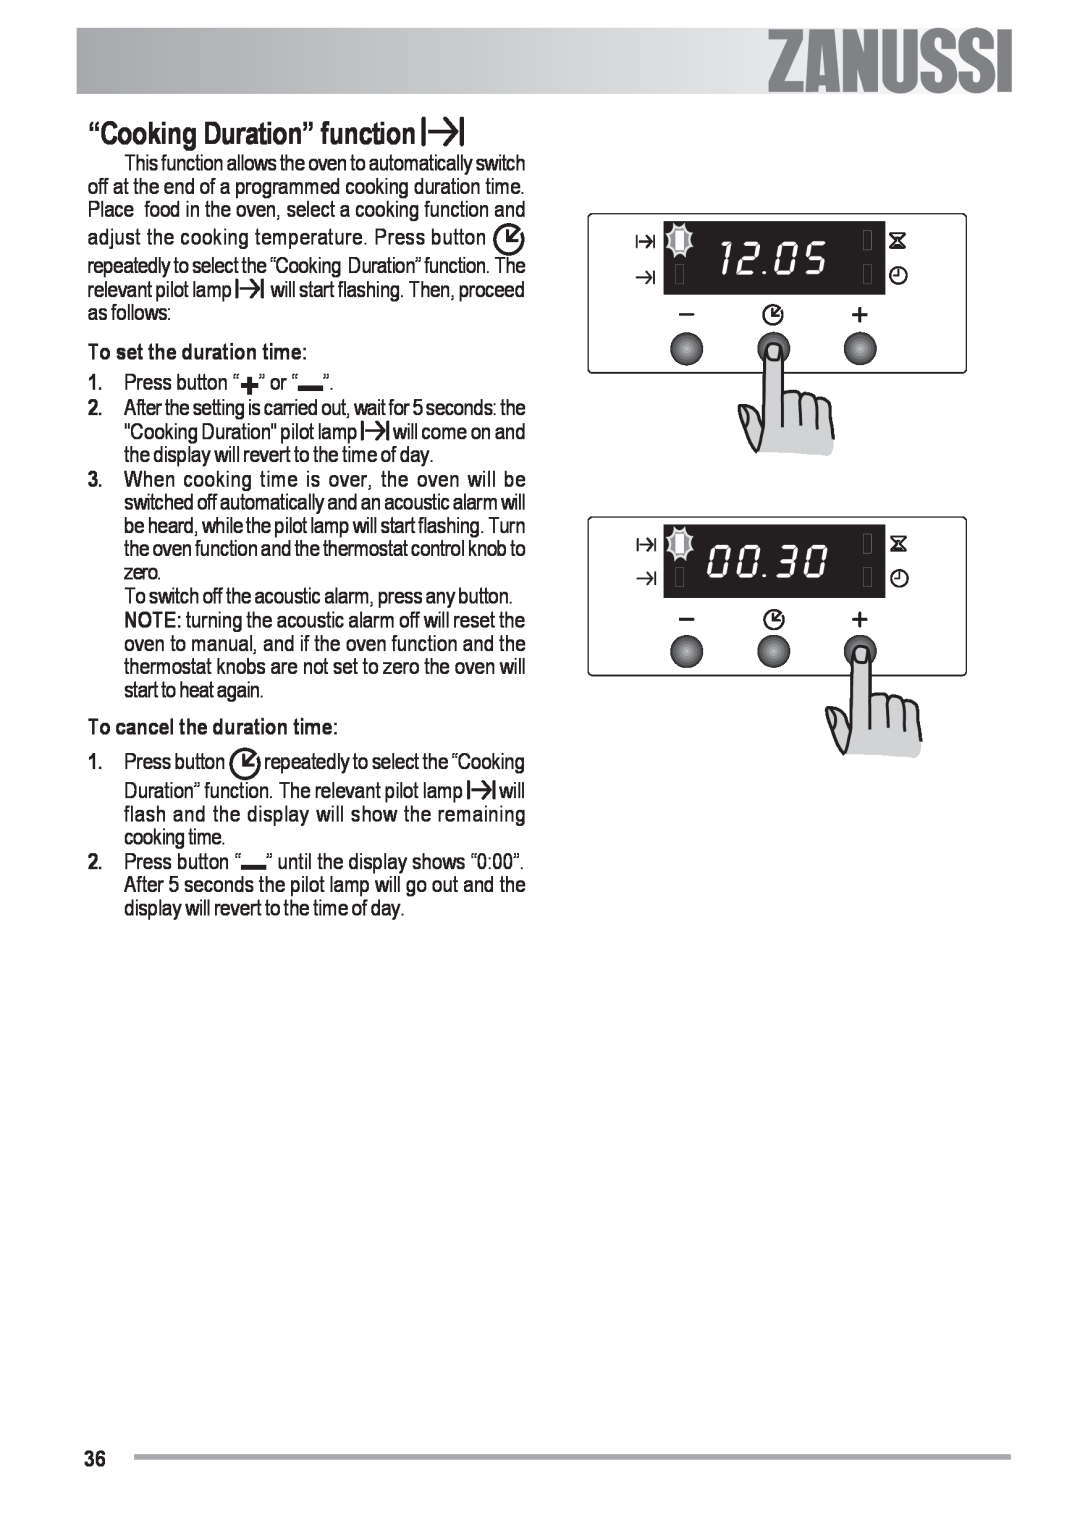 Zanussi ZOU 482 “Cooking Duration” function, as follows, To set the duration time, To cancel the duration time, Electrolux 